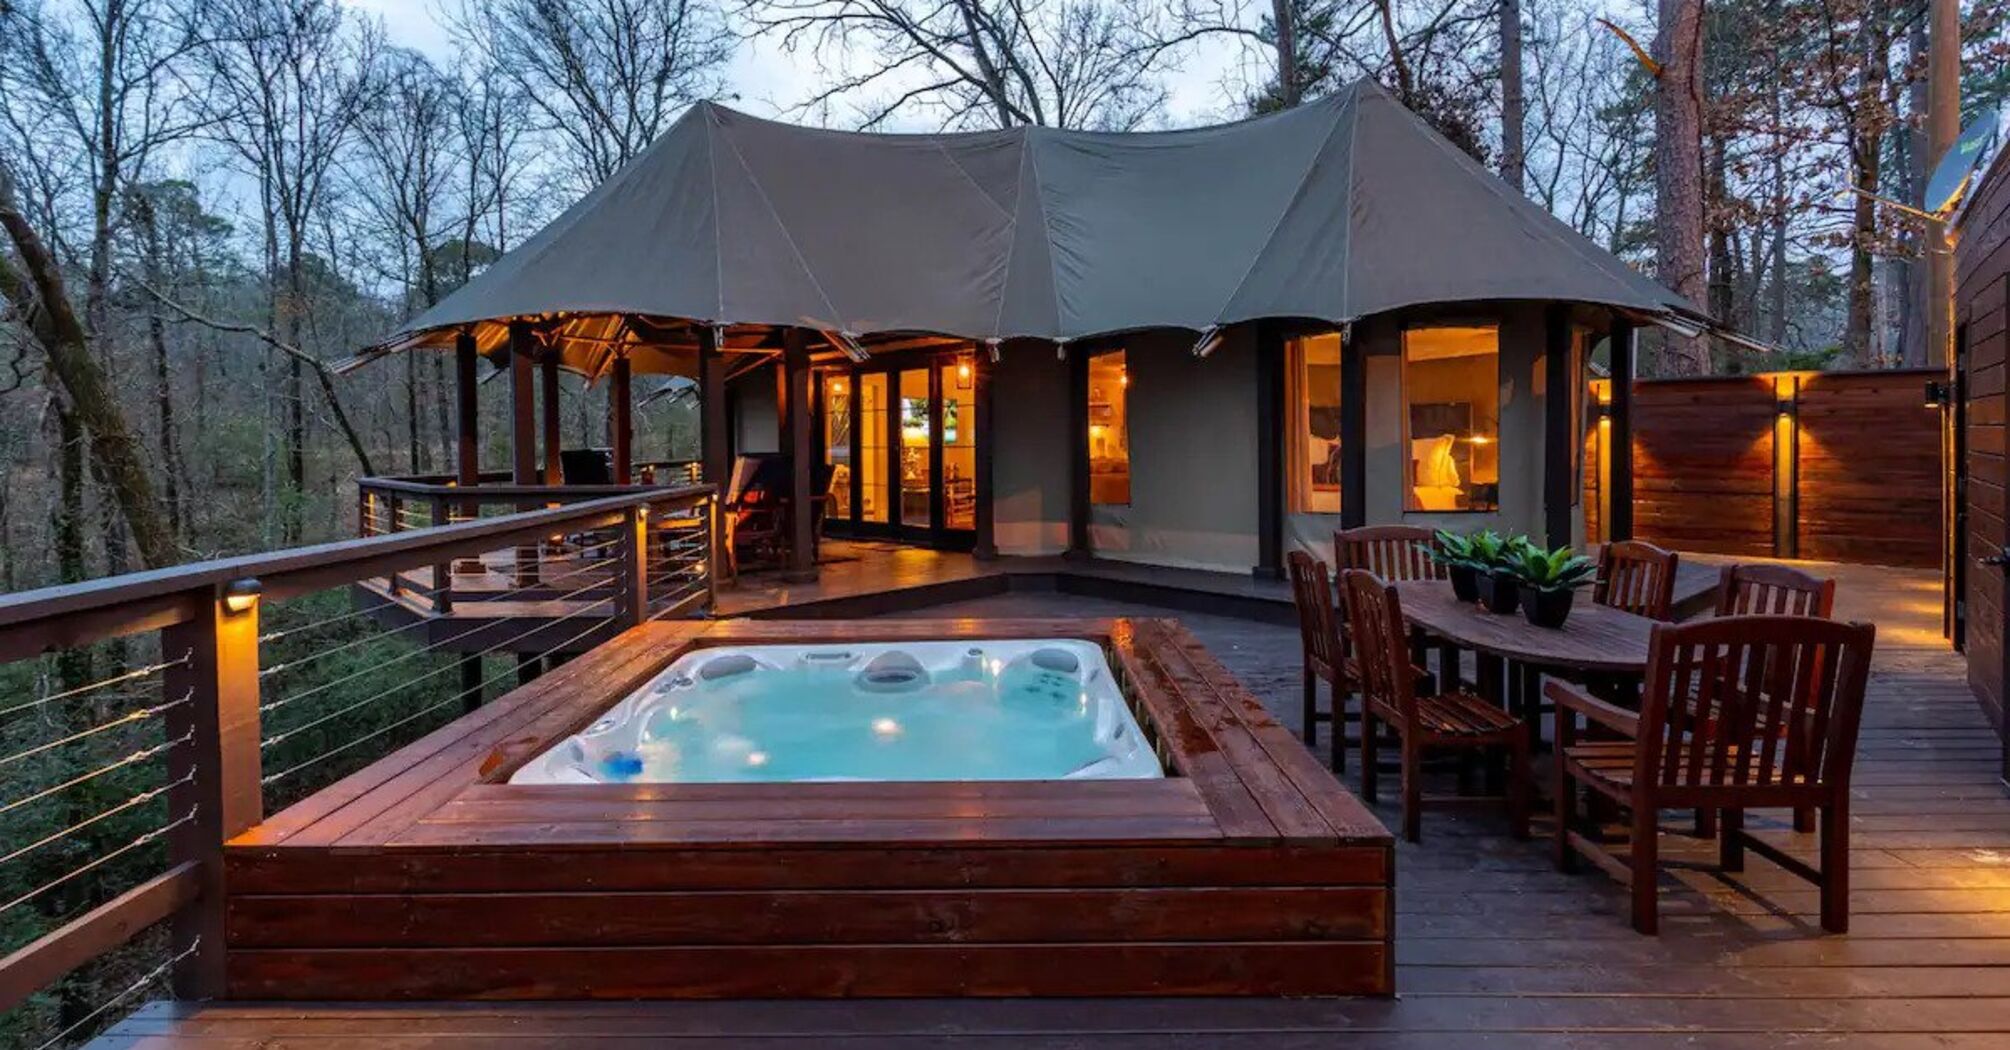 Top 10 best Airbnbs in the US for romantic vacations: from a treehouse over a pond and a luxury tent to a cozy mountain cabin and a beach retreat